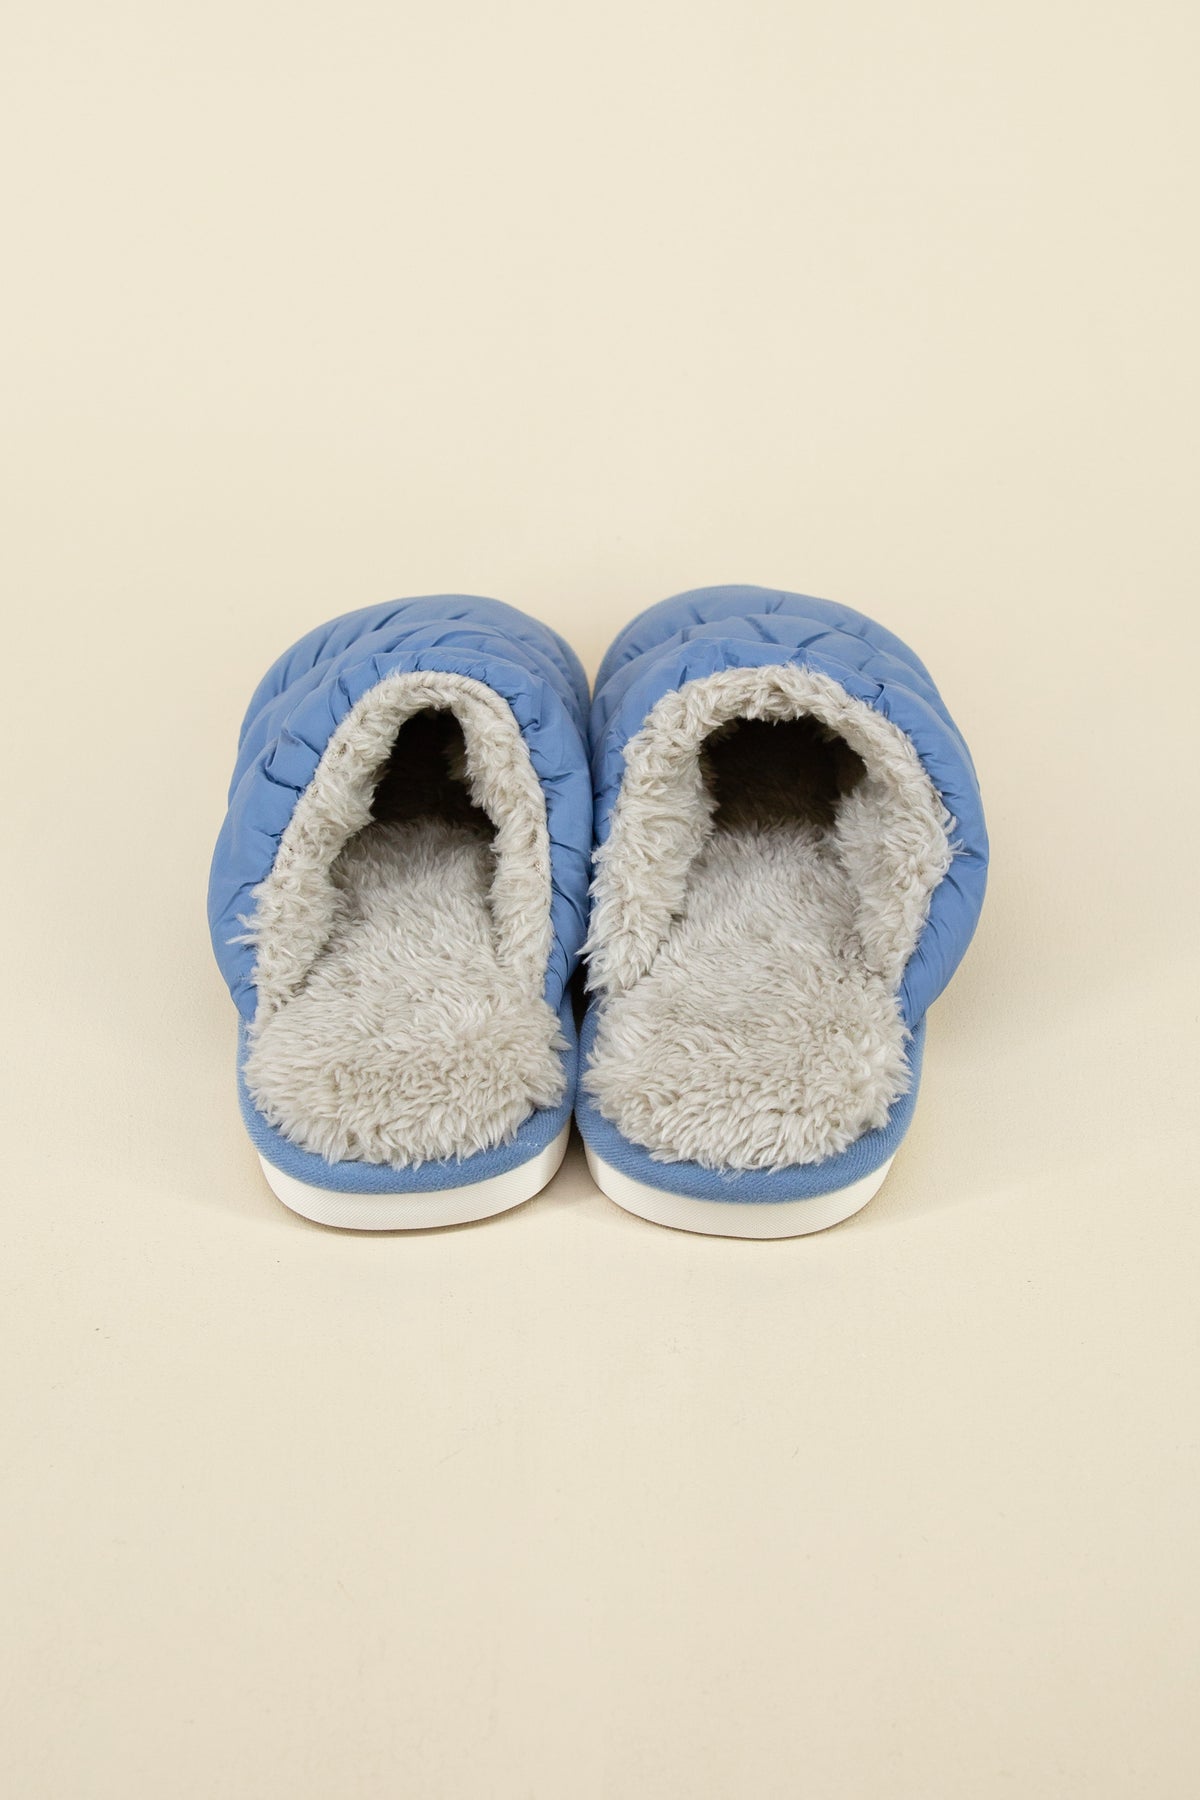 cozy slippers, blue